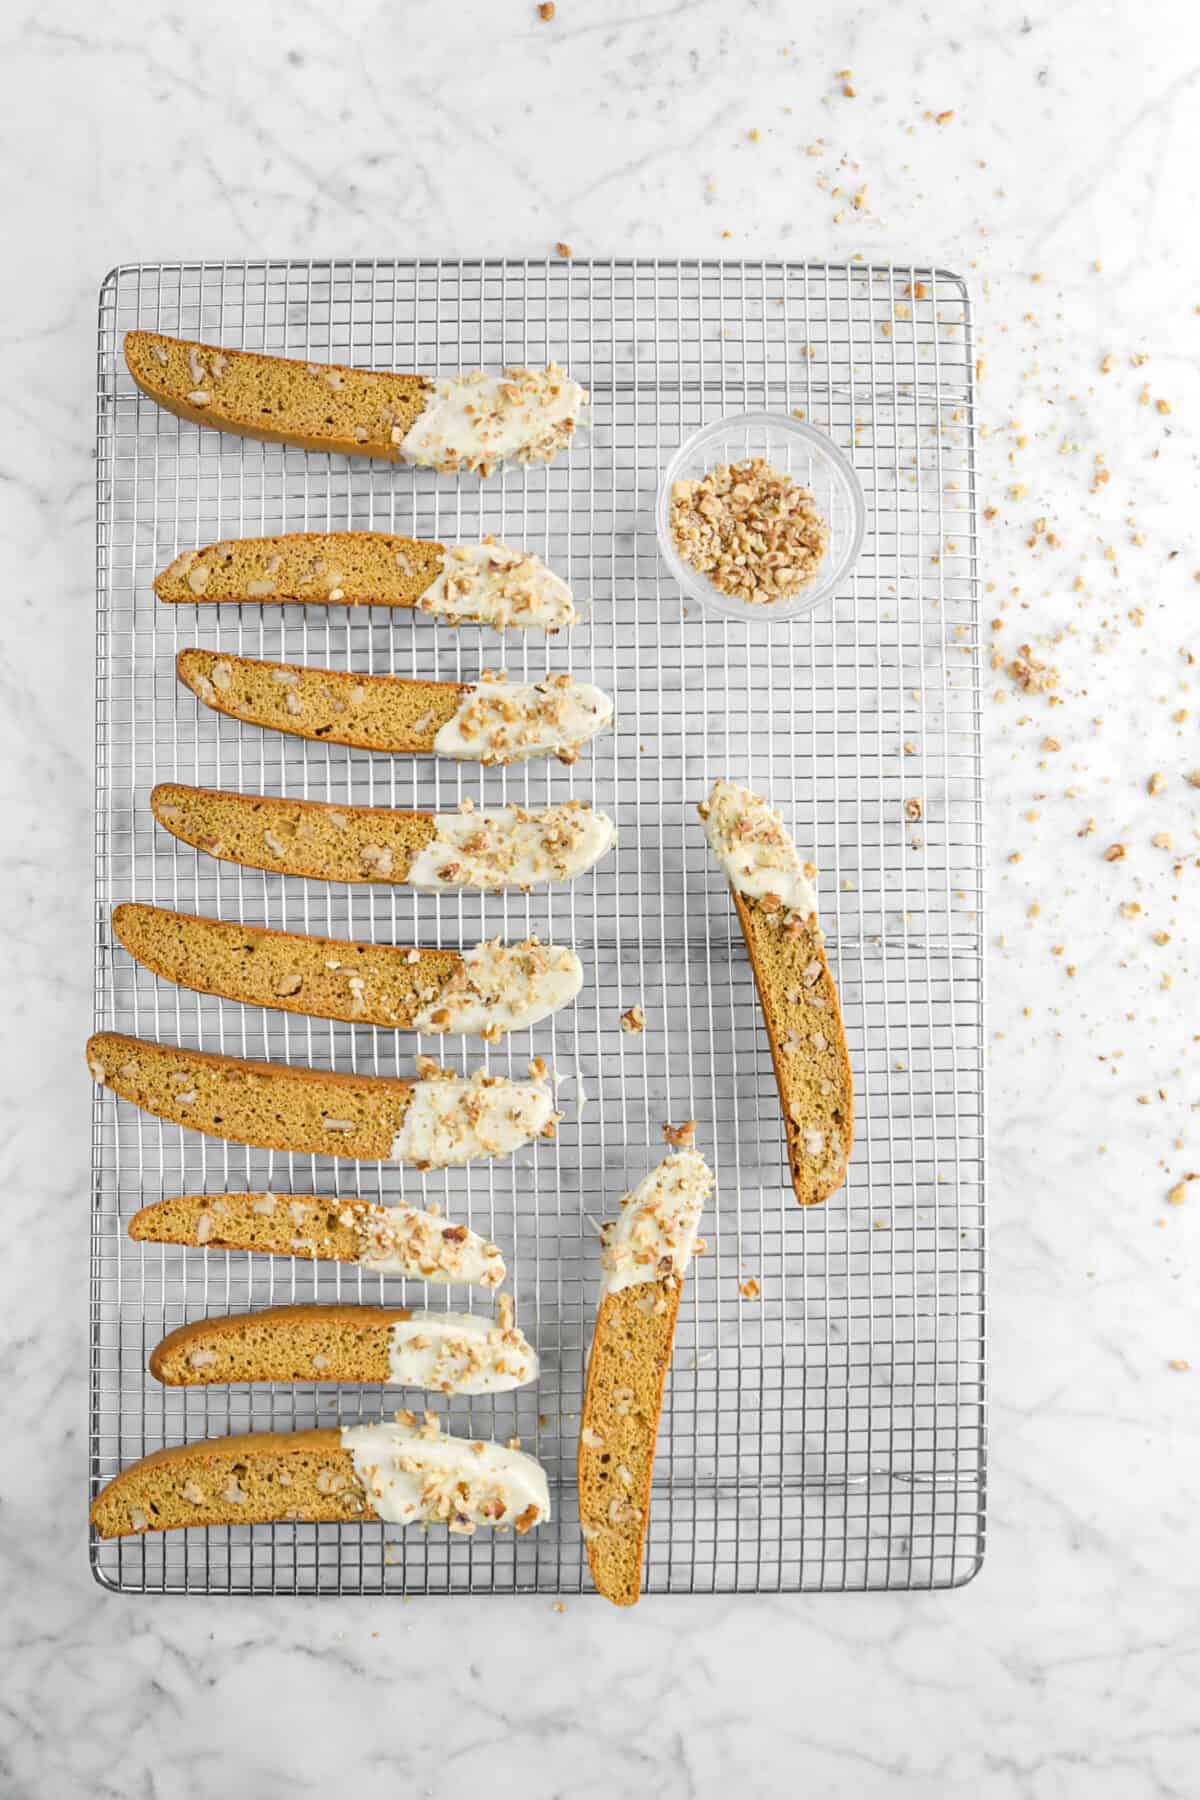 eleven dipped biscotti's on wire cooling rack with walnuts sprinkled on top